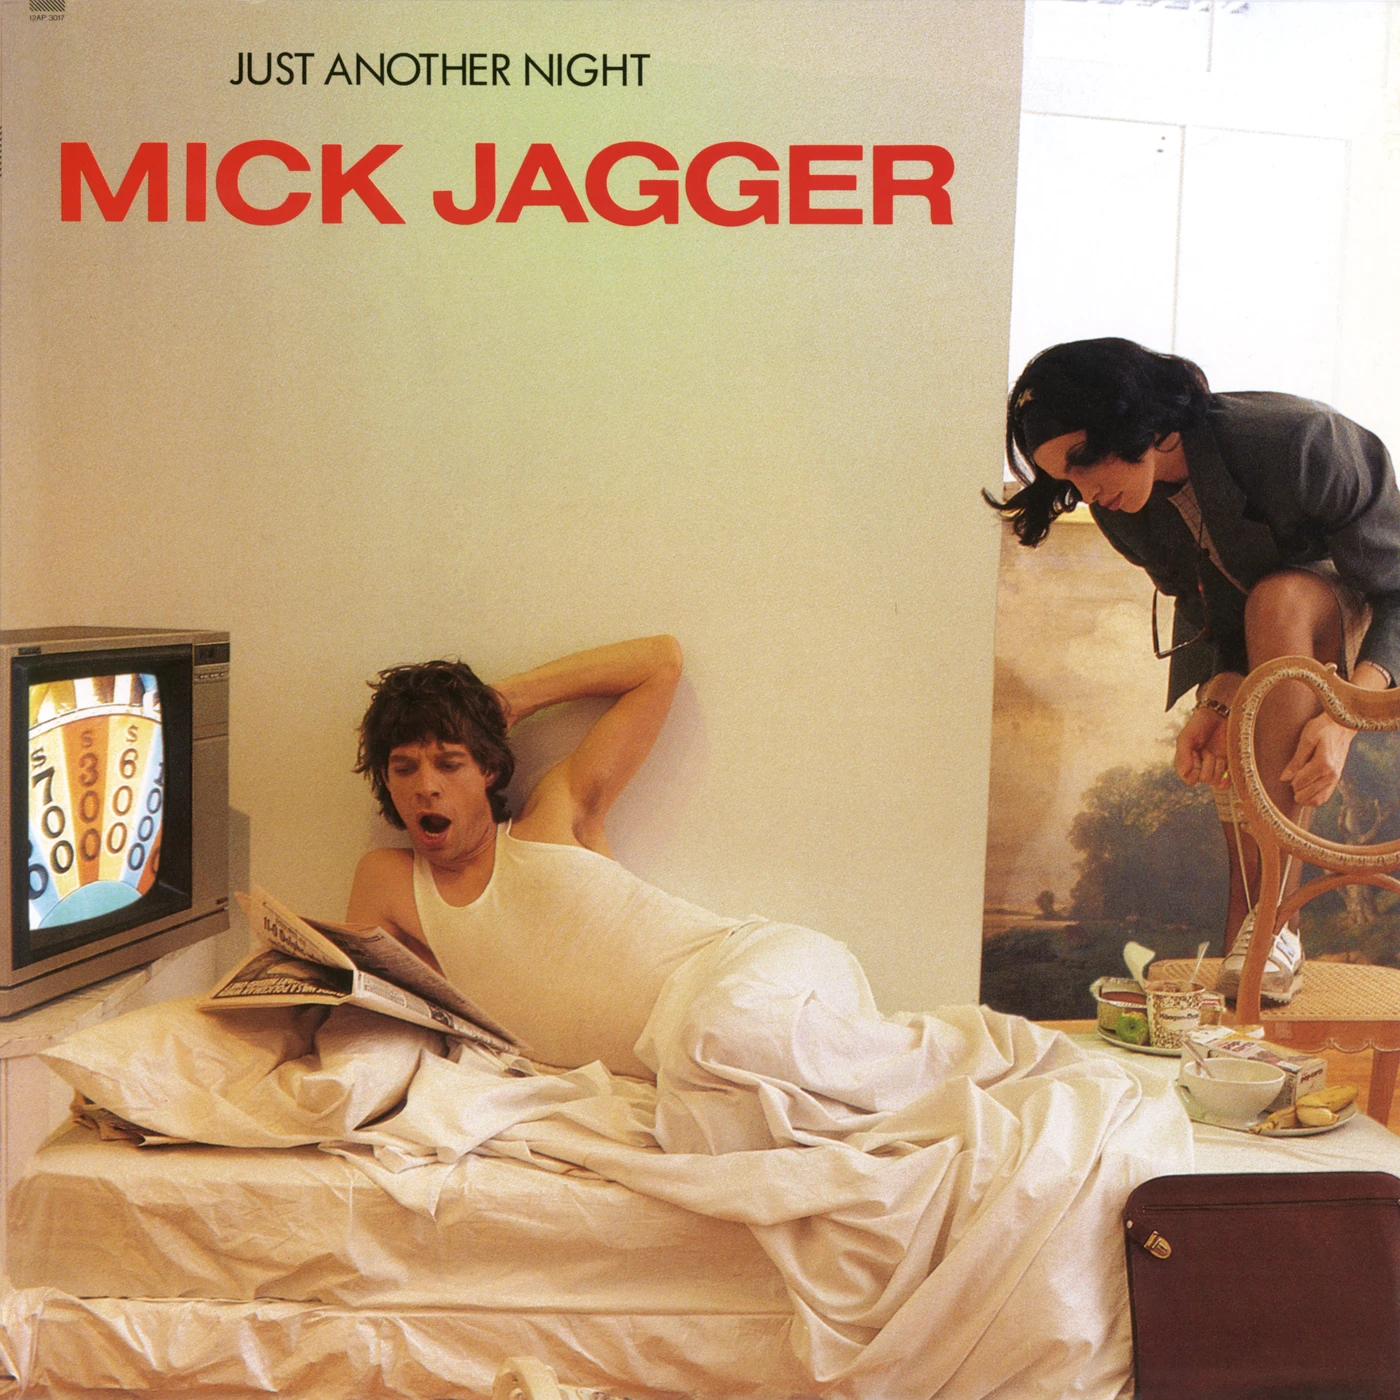 Just Another Night – Mick Jagger